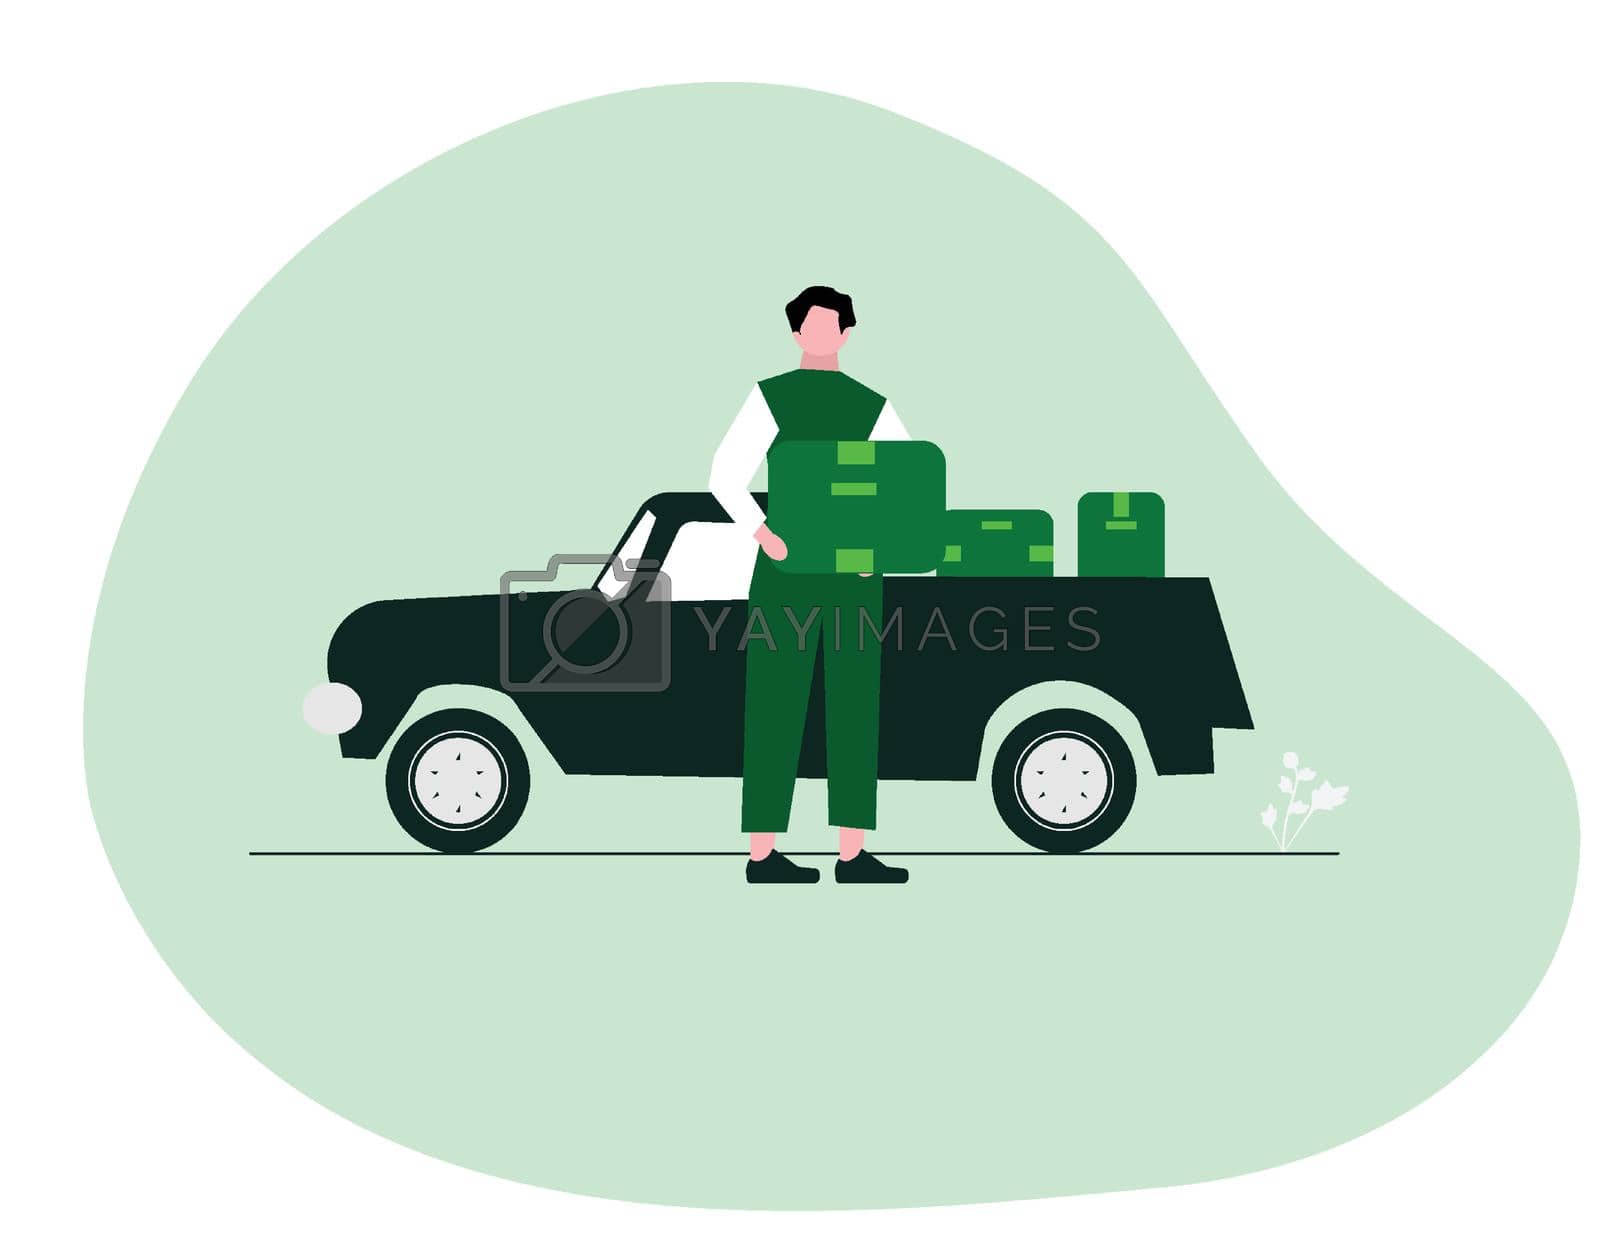 Royalty free image of Illustration people with delivery truck by Vinhsino